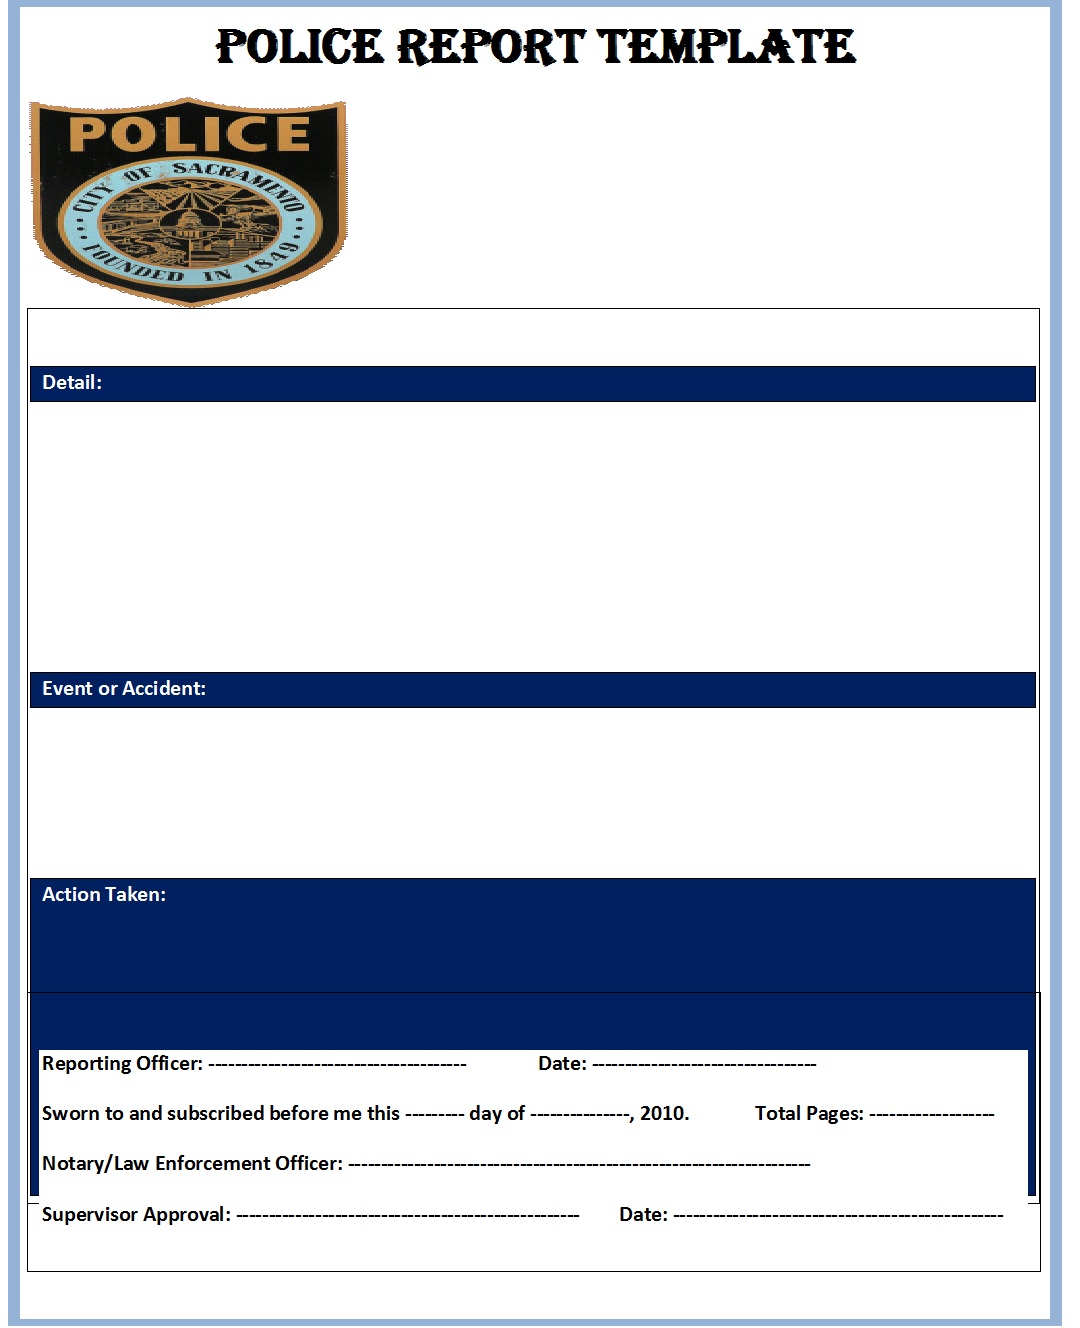 Top 5 Police Report Templates